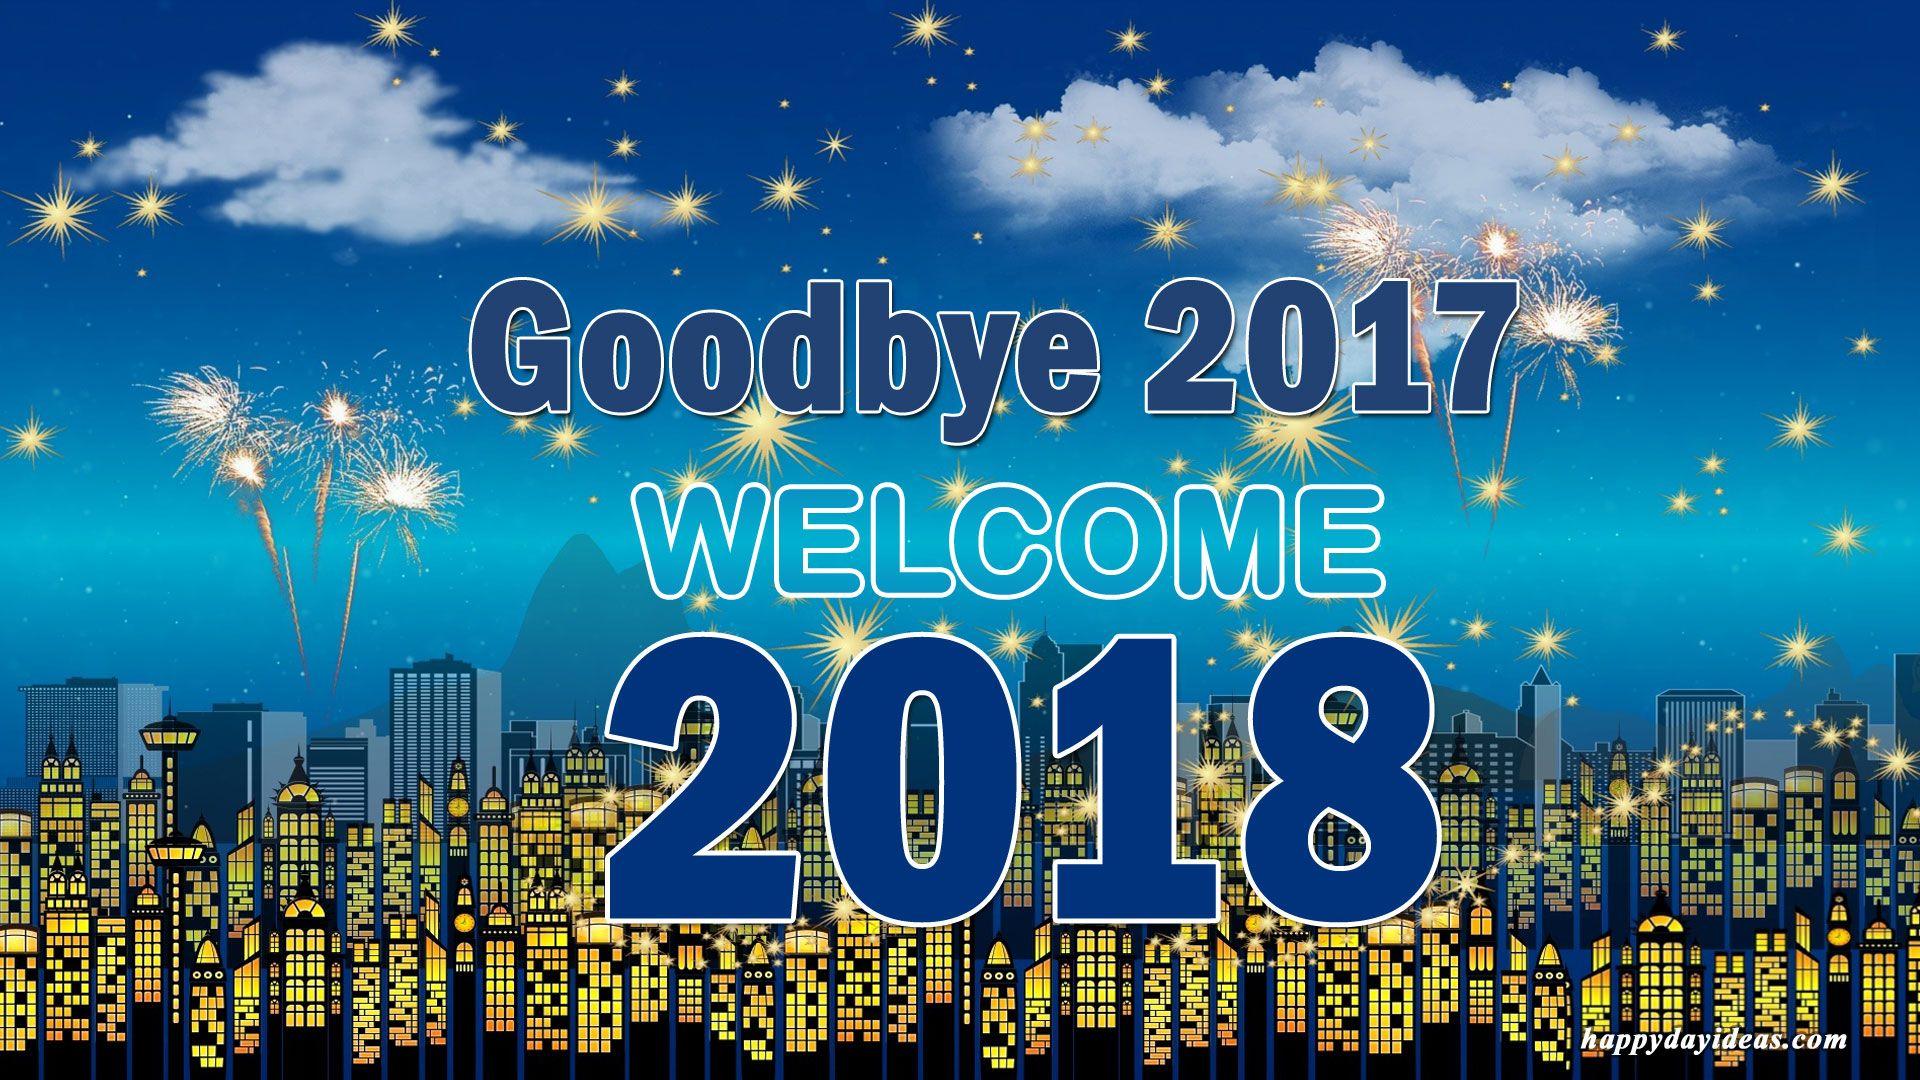 Goodbye 2017 Welcome - wallpaper and quotes